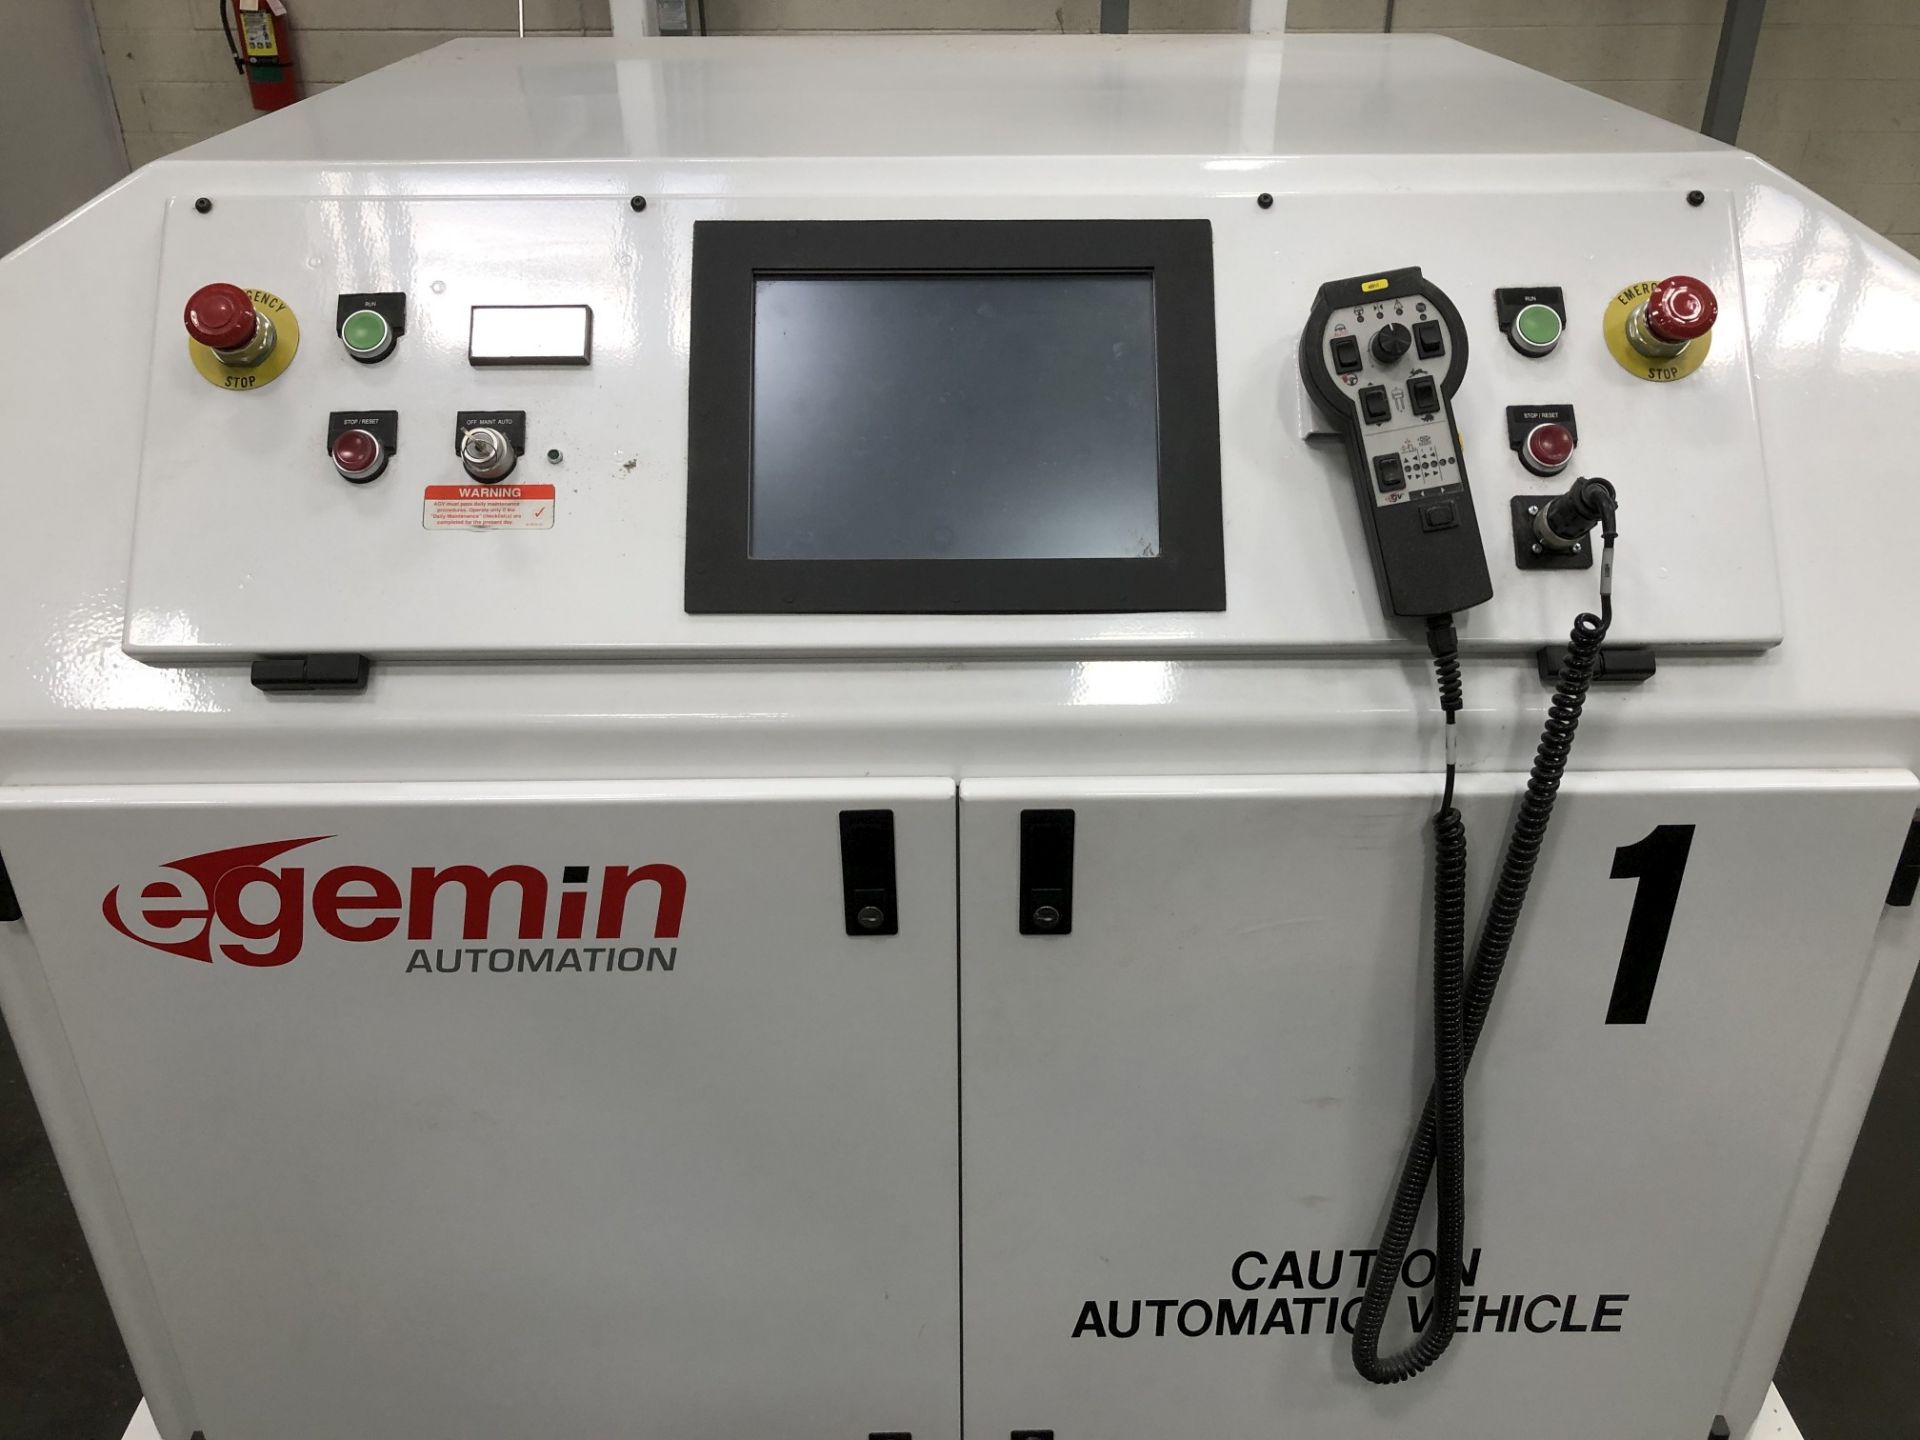 2017 Egemin Automation Unit Load Deck Automated Guided Vehicle (AGV), Model LTV 0515 L, 300 FPM - Image 5 of 11